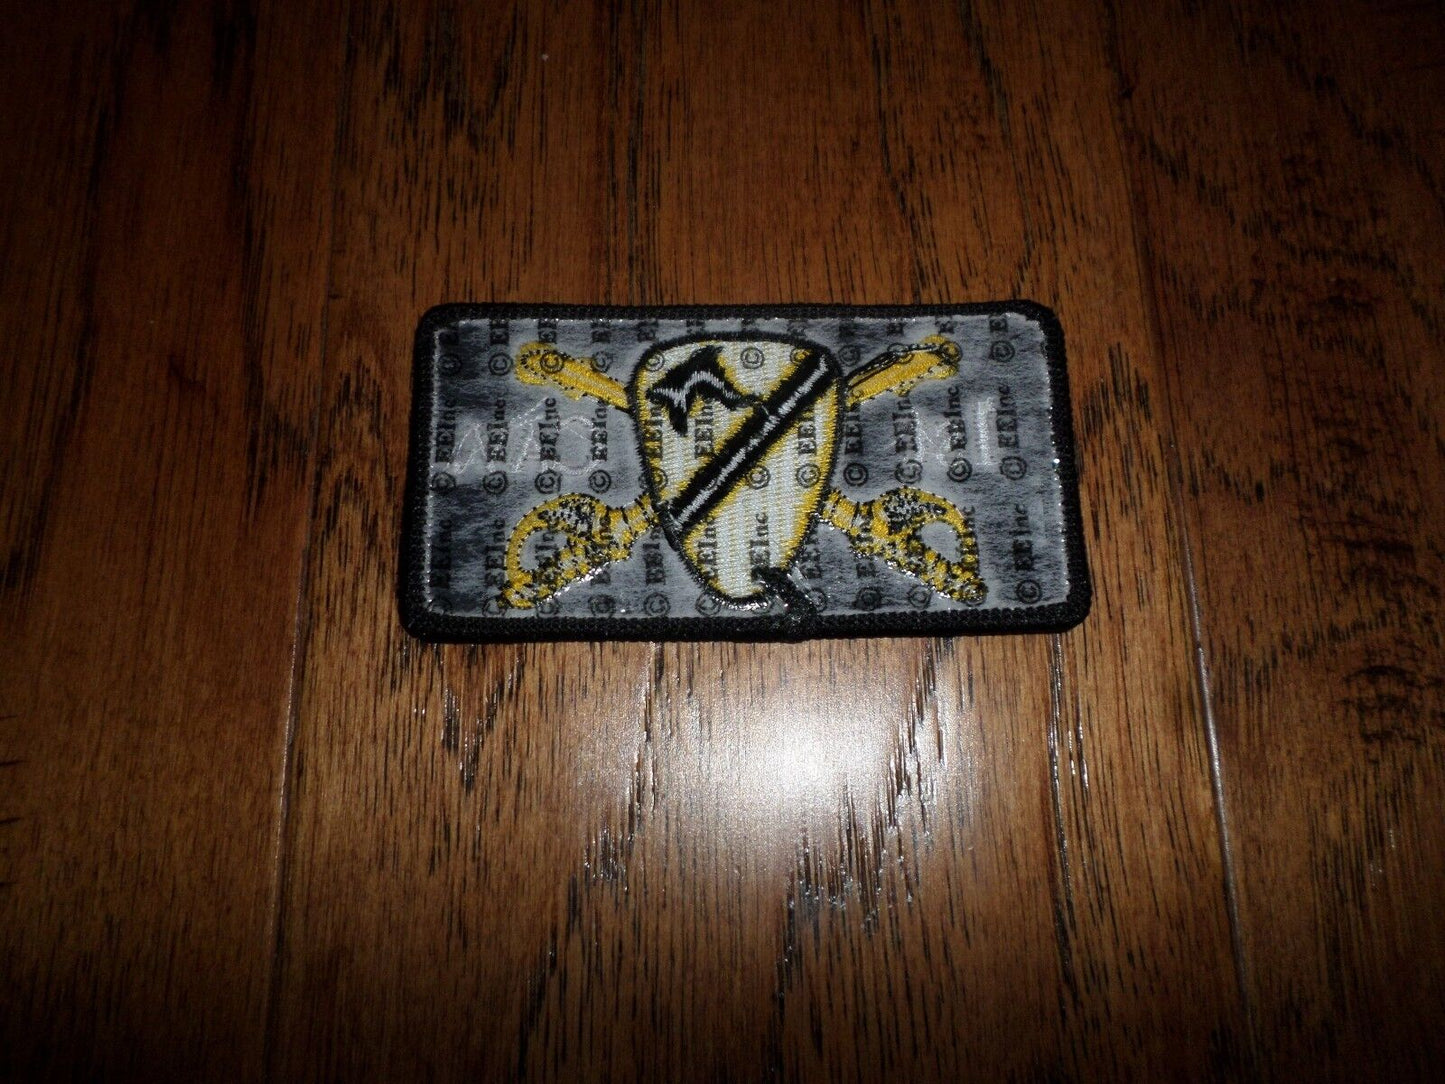 U.S MILITARY ARMY 1ST CAVALRY HAT ARM PATCH 3 3/4" X 2 " INCHES 1ST CAV